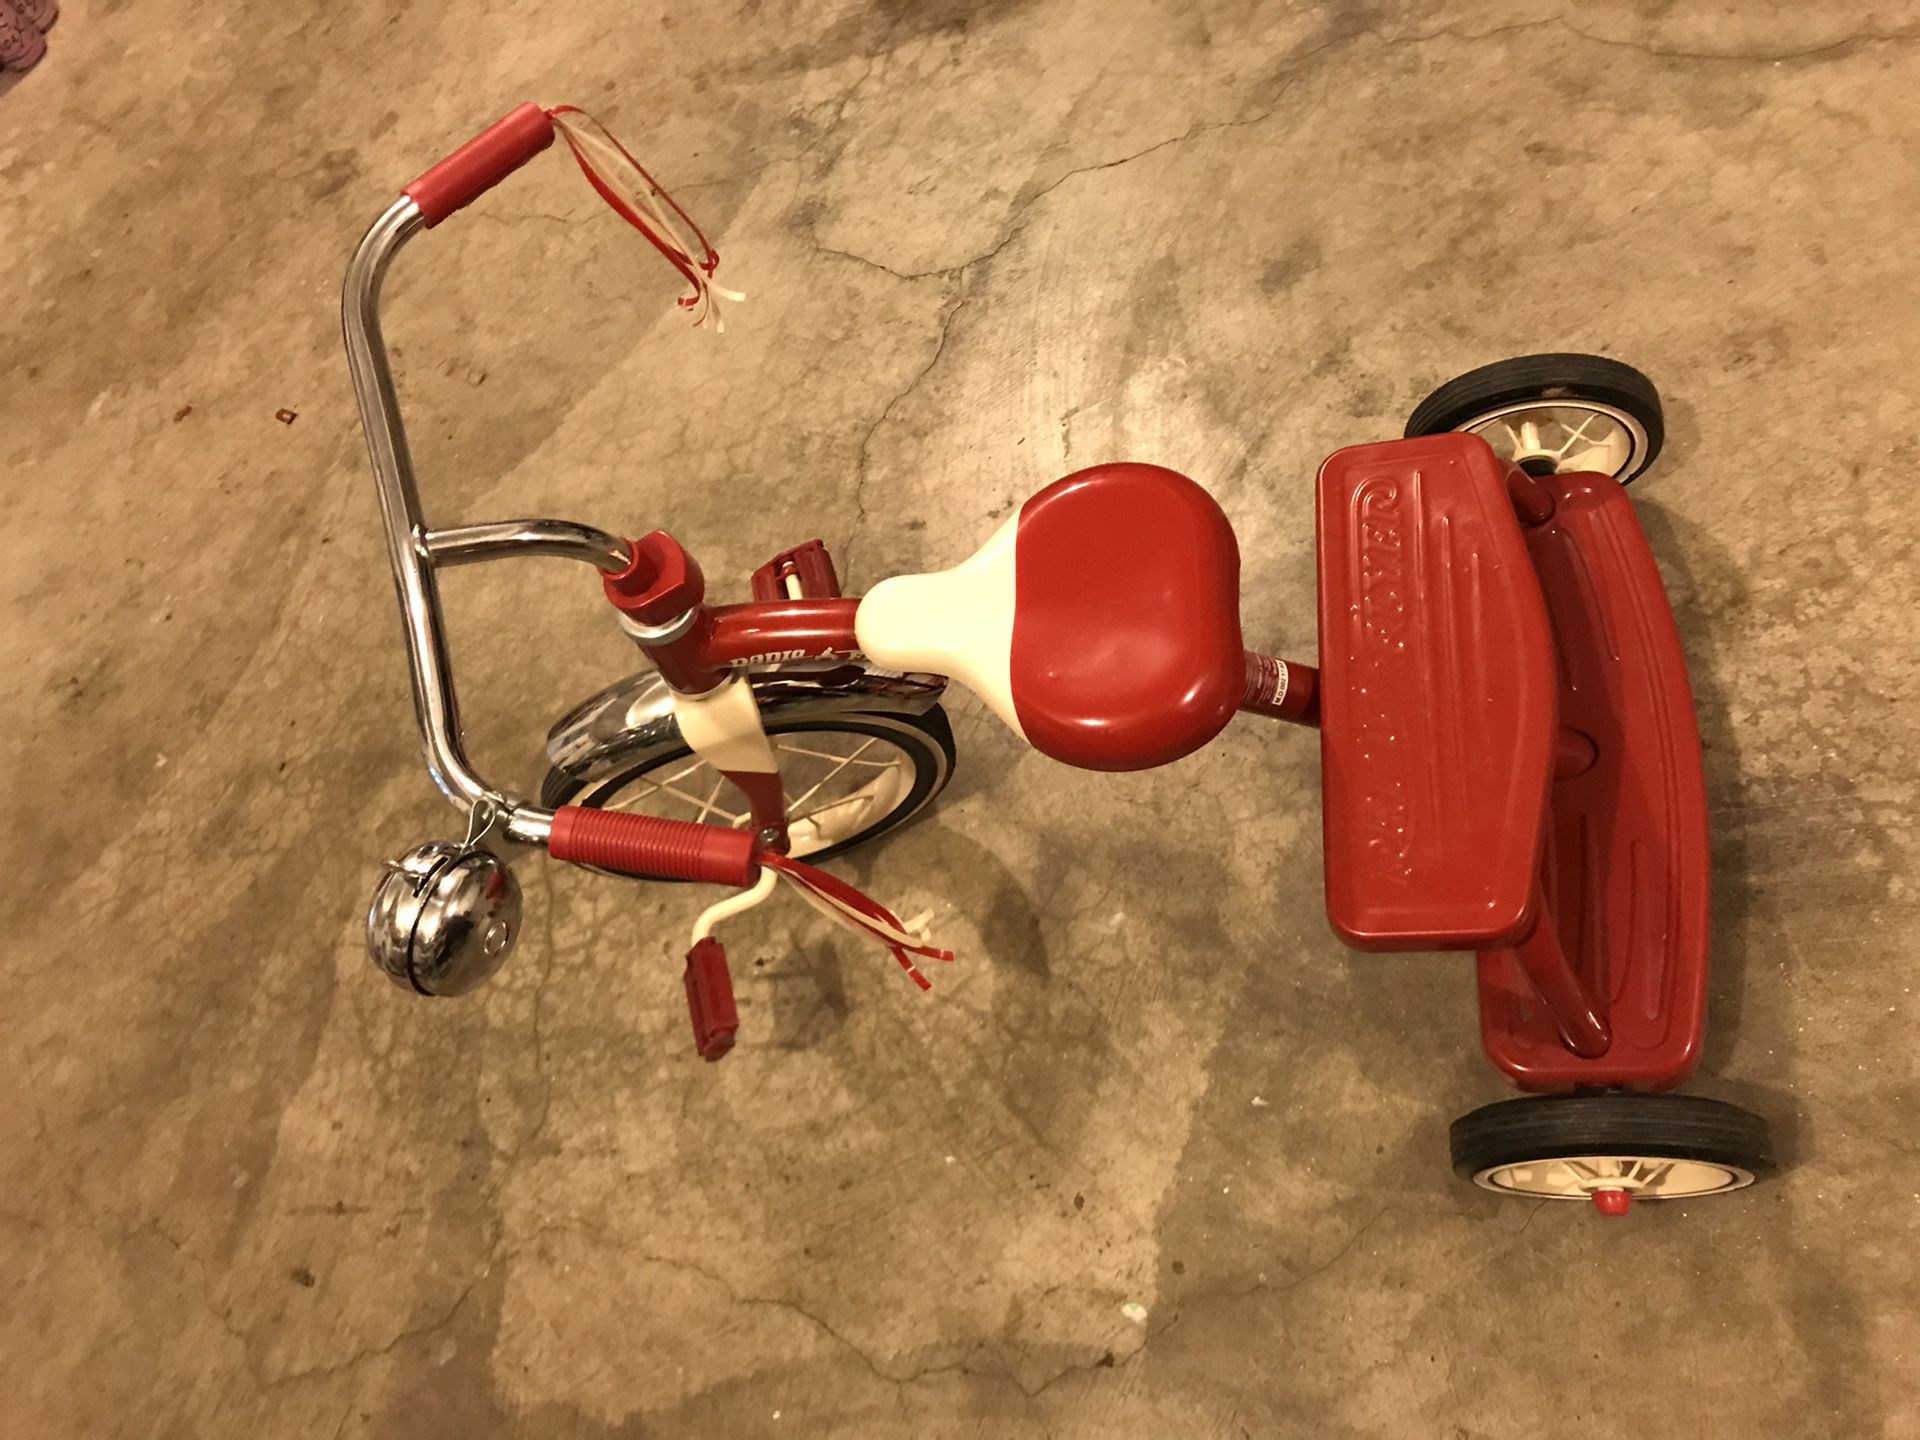 Red Radioflyer Classic Tricycle